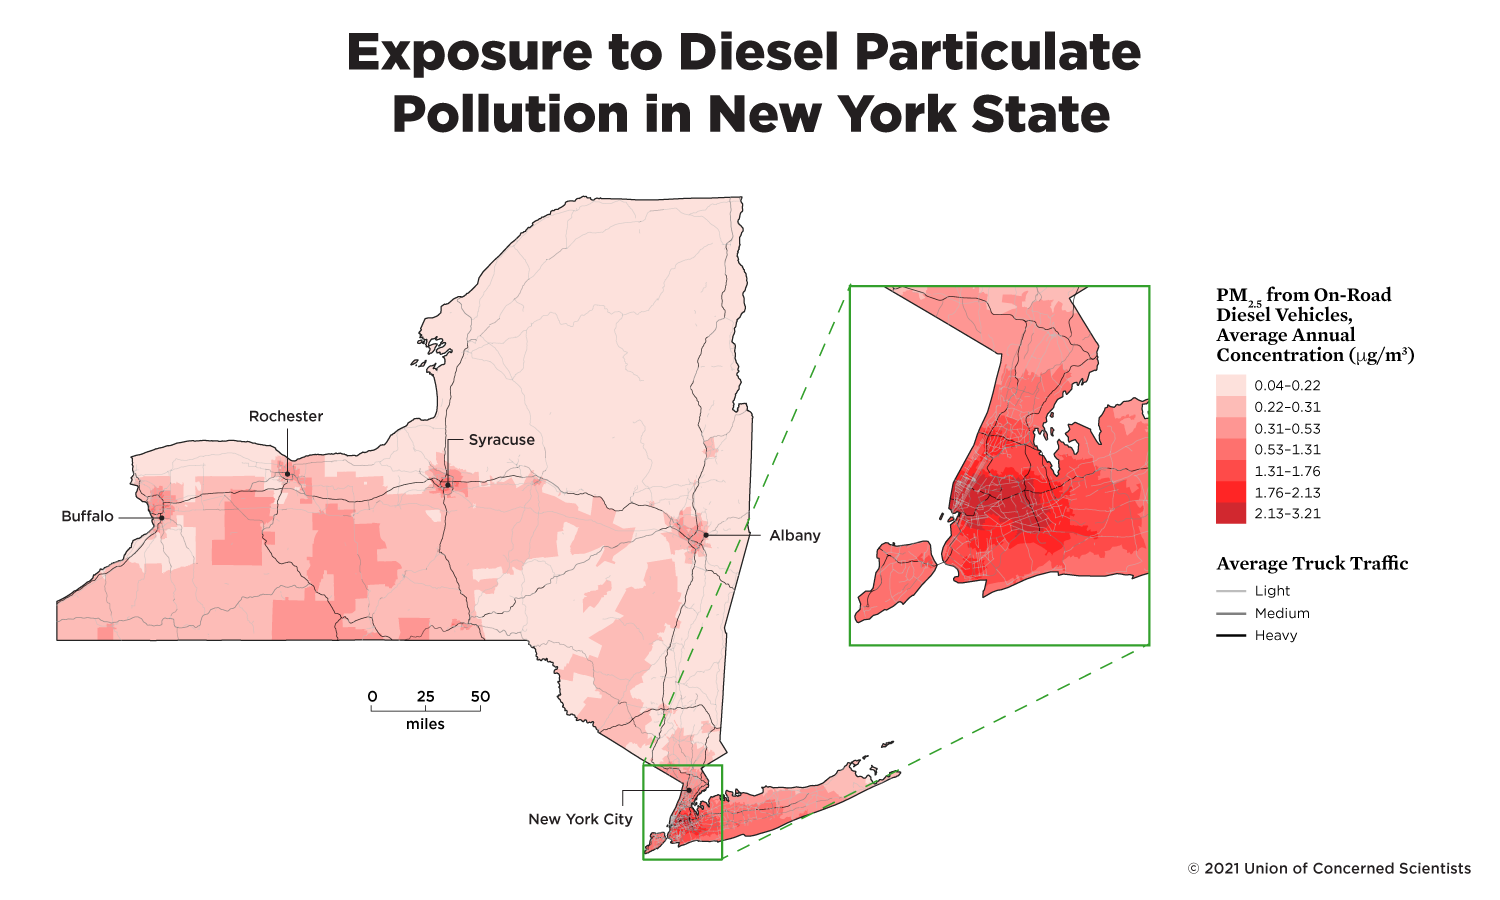 map of NY state showing exposure to diesel particulate pollution 